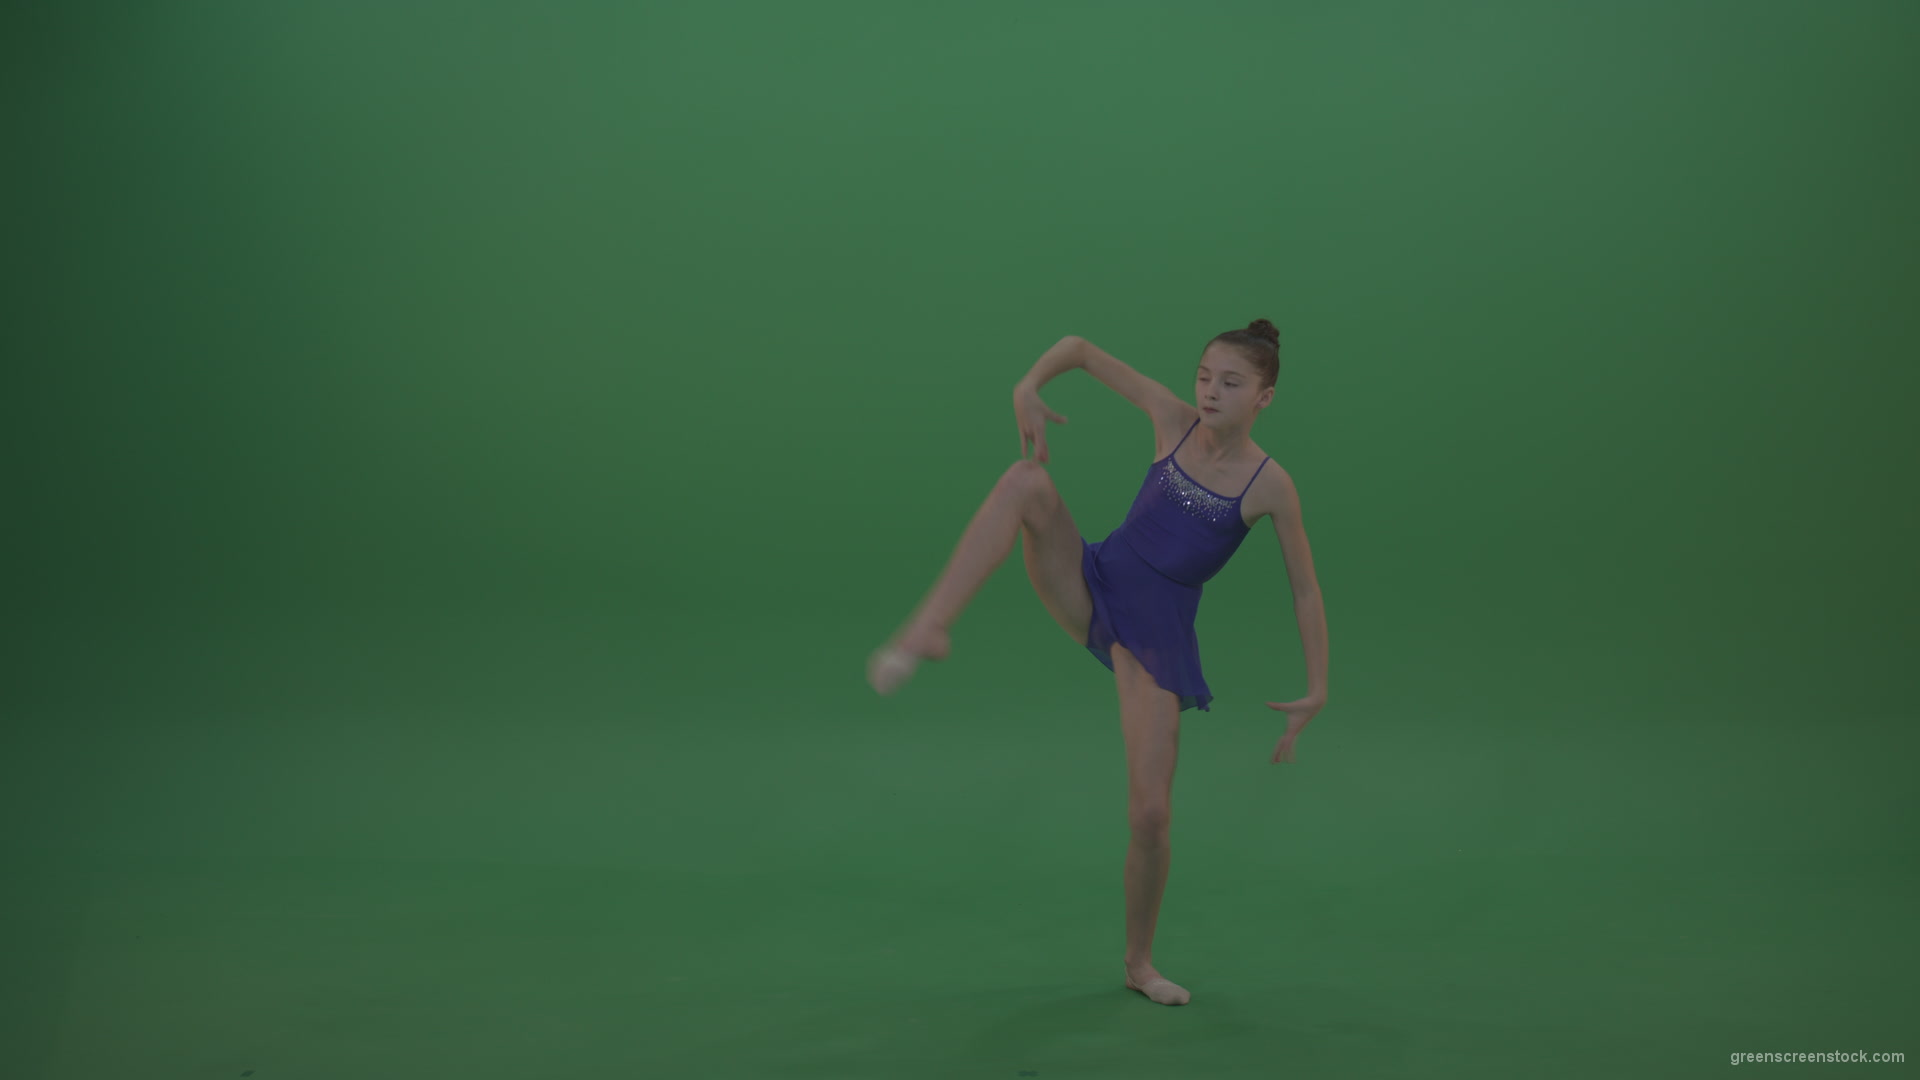 Young_Gymnast_Female_Wearing_Blue_Show_Costume_Performing_Great_Spinning_Arabesque_Moves_Showing_Awesome_Technique_On_Green_Screen_Wall_Background_008 Green Screen Stock